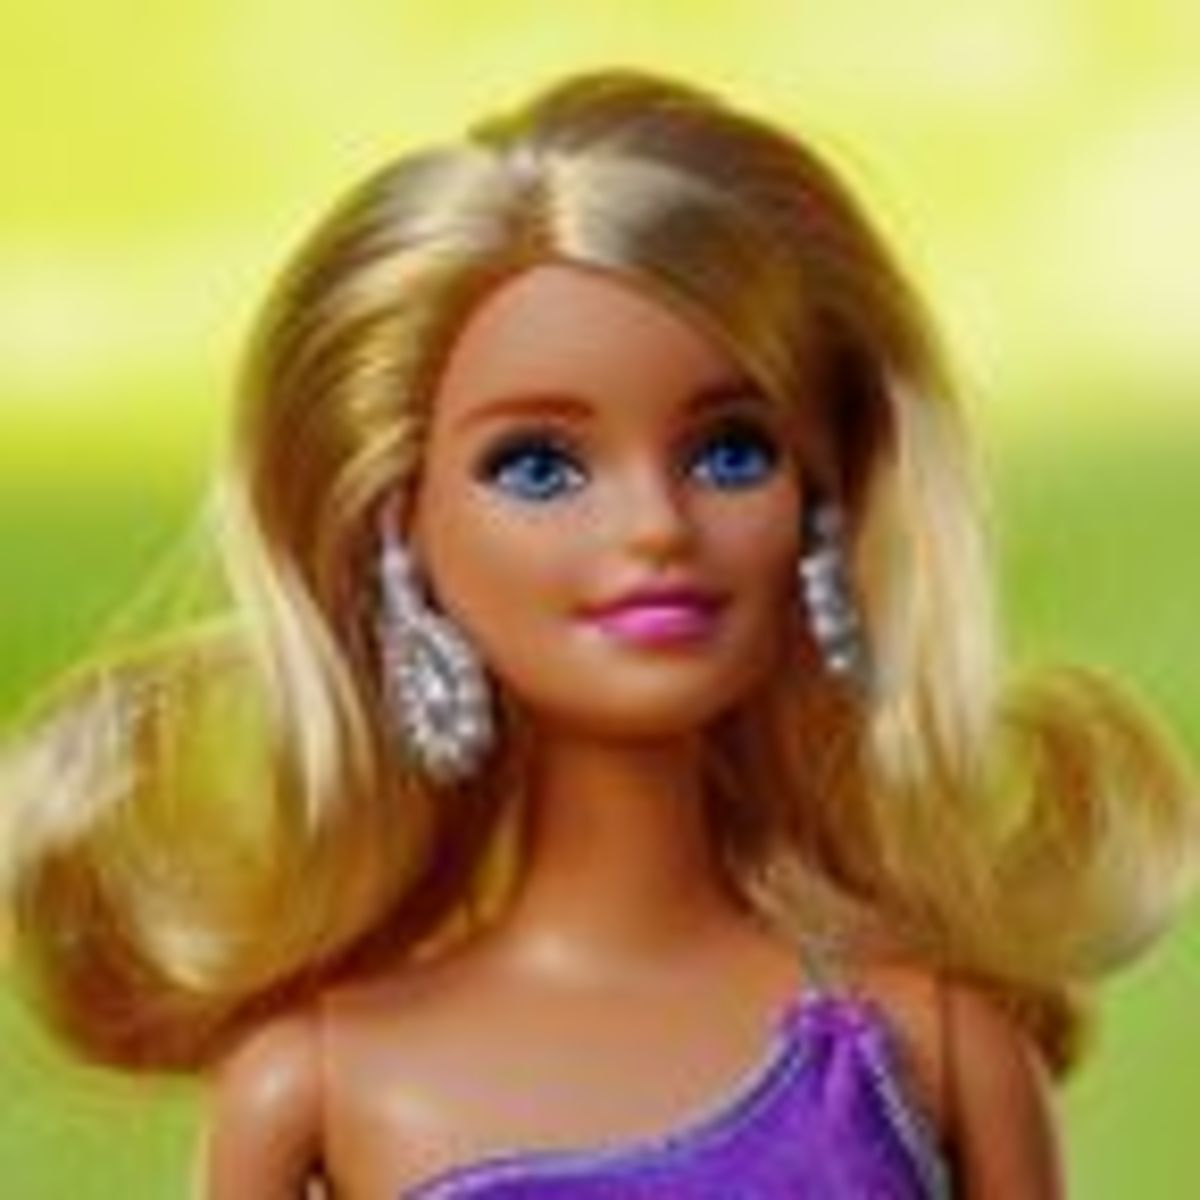 age to play with barbies